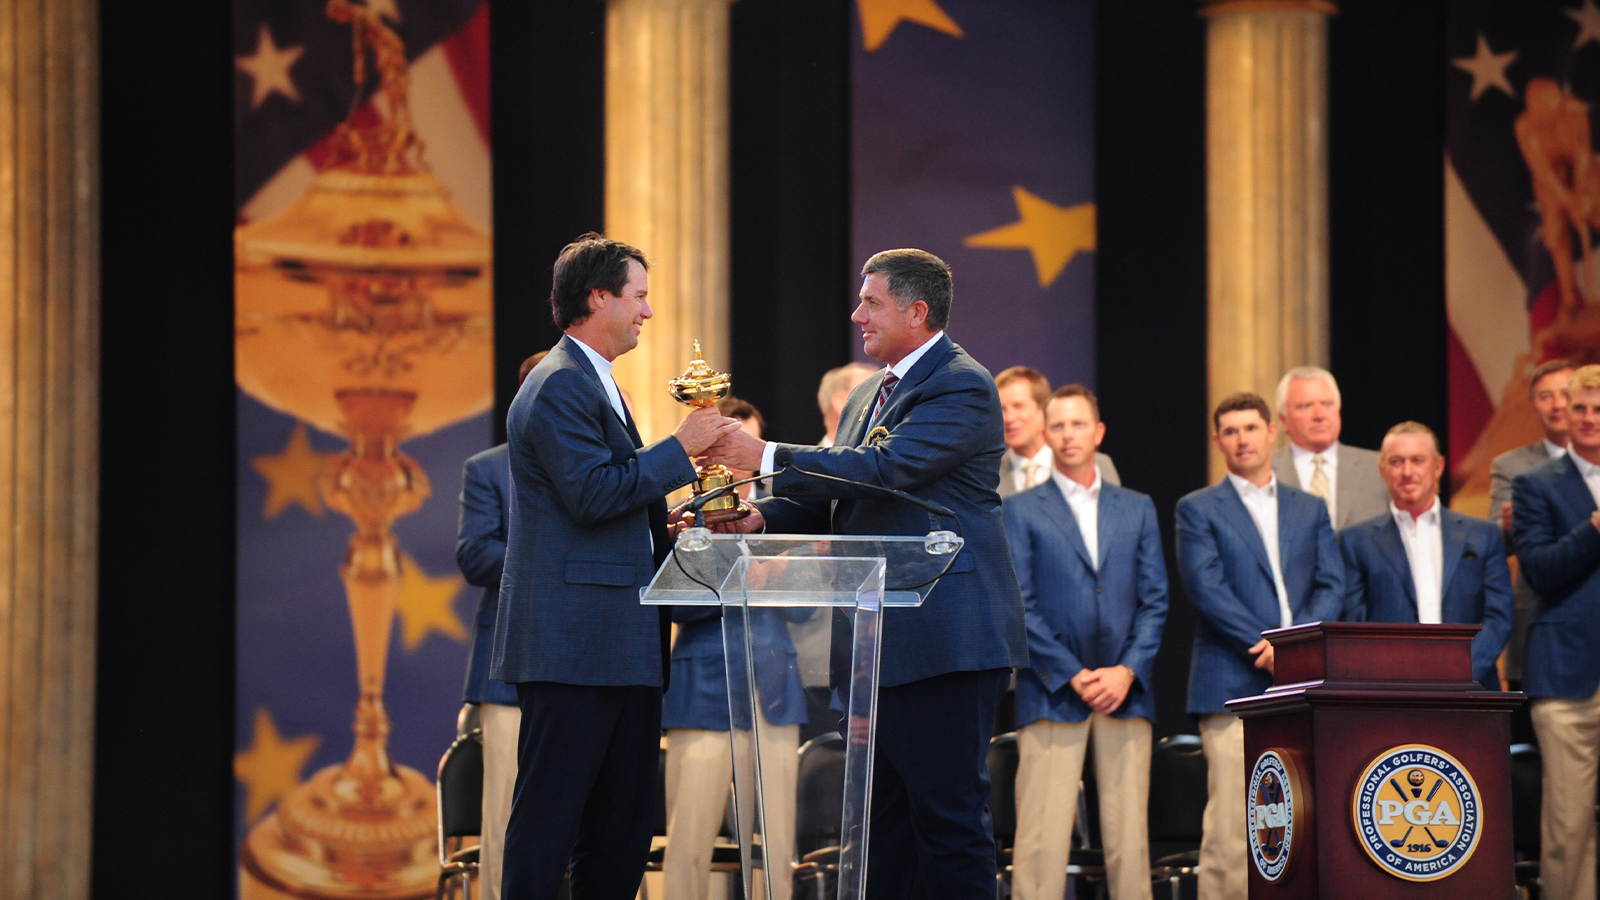 35th PGA President Brian Whitcomb (R) presents the Ryder Cup trophy to U.S. Ryder Cup Captain Paul Azinger (L) during the closing ceremony of the 37th Ryder Cup at Valhalla Golf Club in Louisville, Kentucky, USA, on Sunday, September 21, 2008. (Photo by Montana Pritchard/The PGA of America)